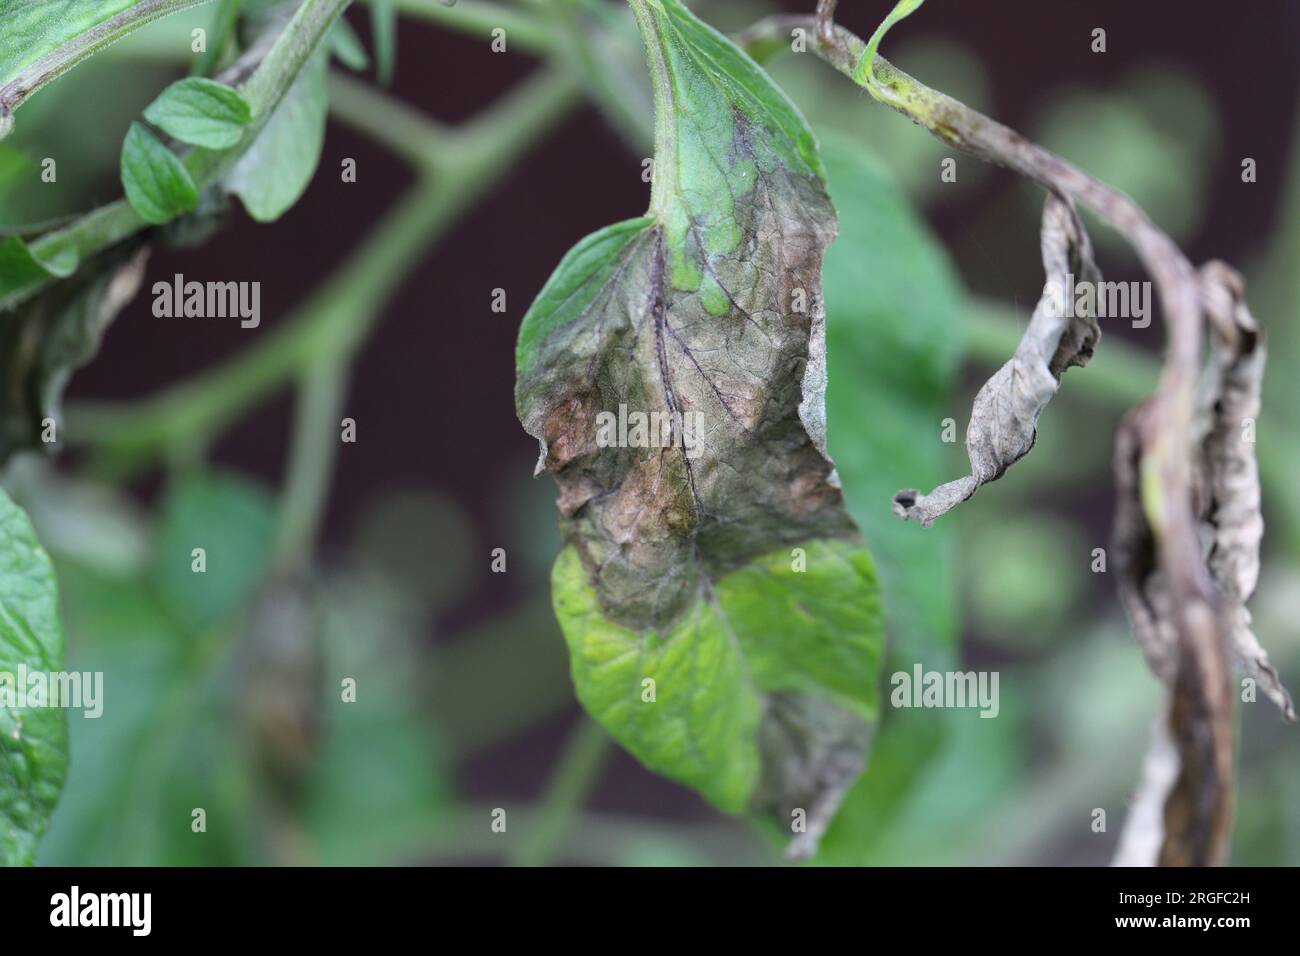 Brown rot also called downy mildew or late blight caused by the fungus Phytophthora infestans on tomato in a home garden. Stock Photo